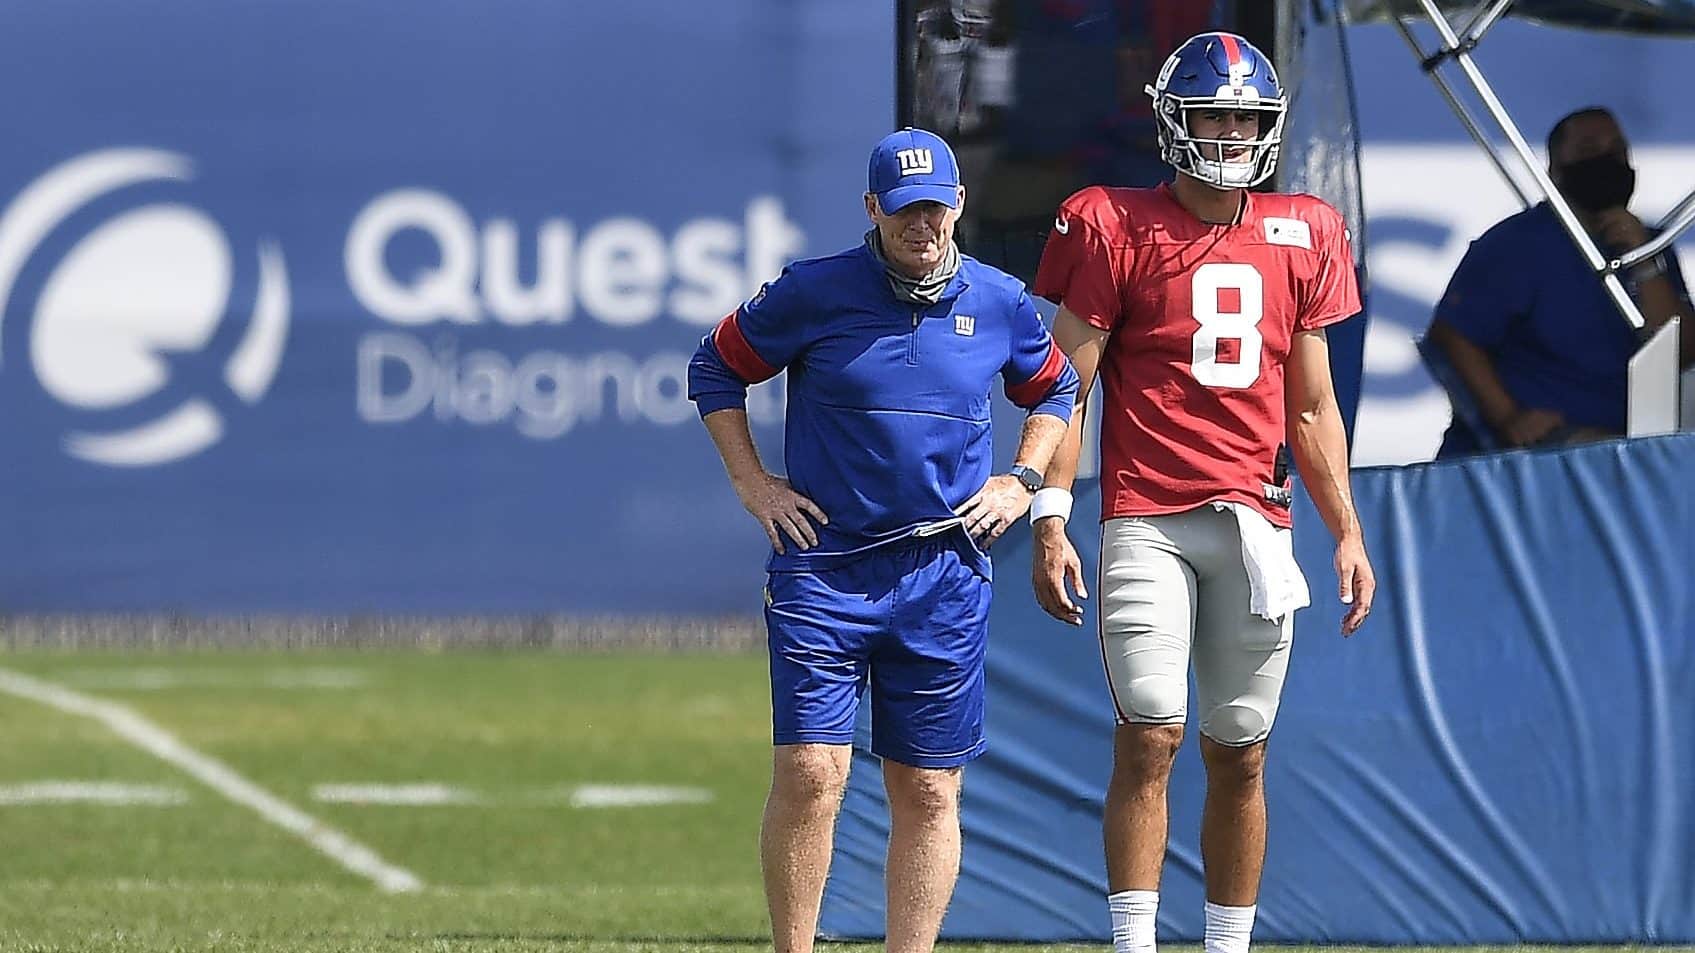 EAST RUTHERFORD, NEW JERSEY - AUGUST 21: Offensive coordinator Jason Garrett looks on with Daniel Jones #8 of the New York Giants during training camp at NY Giants Quest Diagnostics Training Center on August 21, 2020 in East Rutherford, New Jersey.